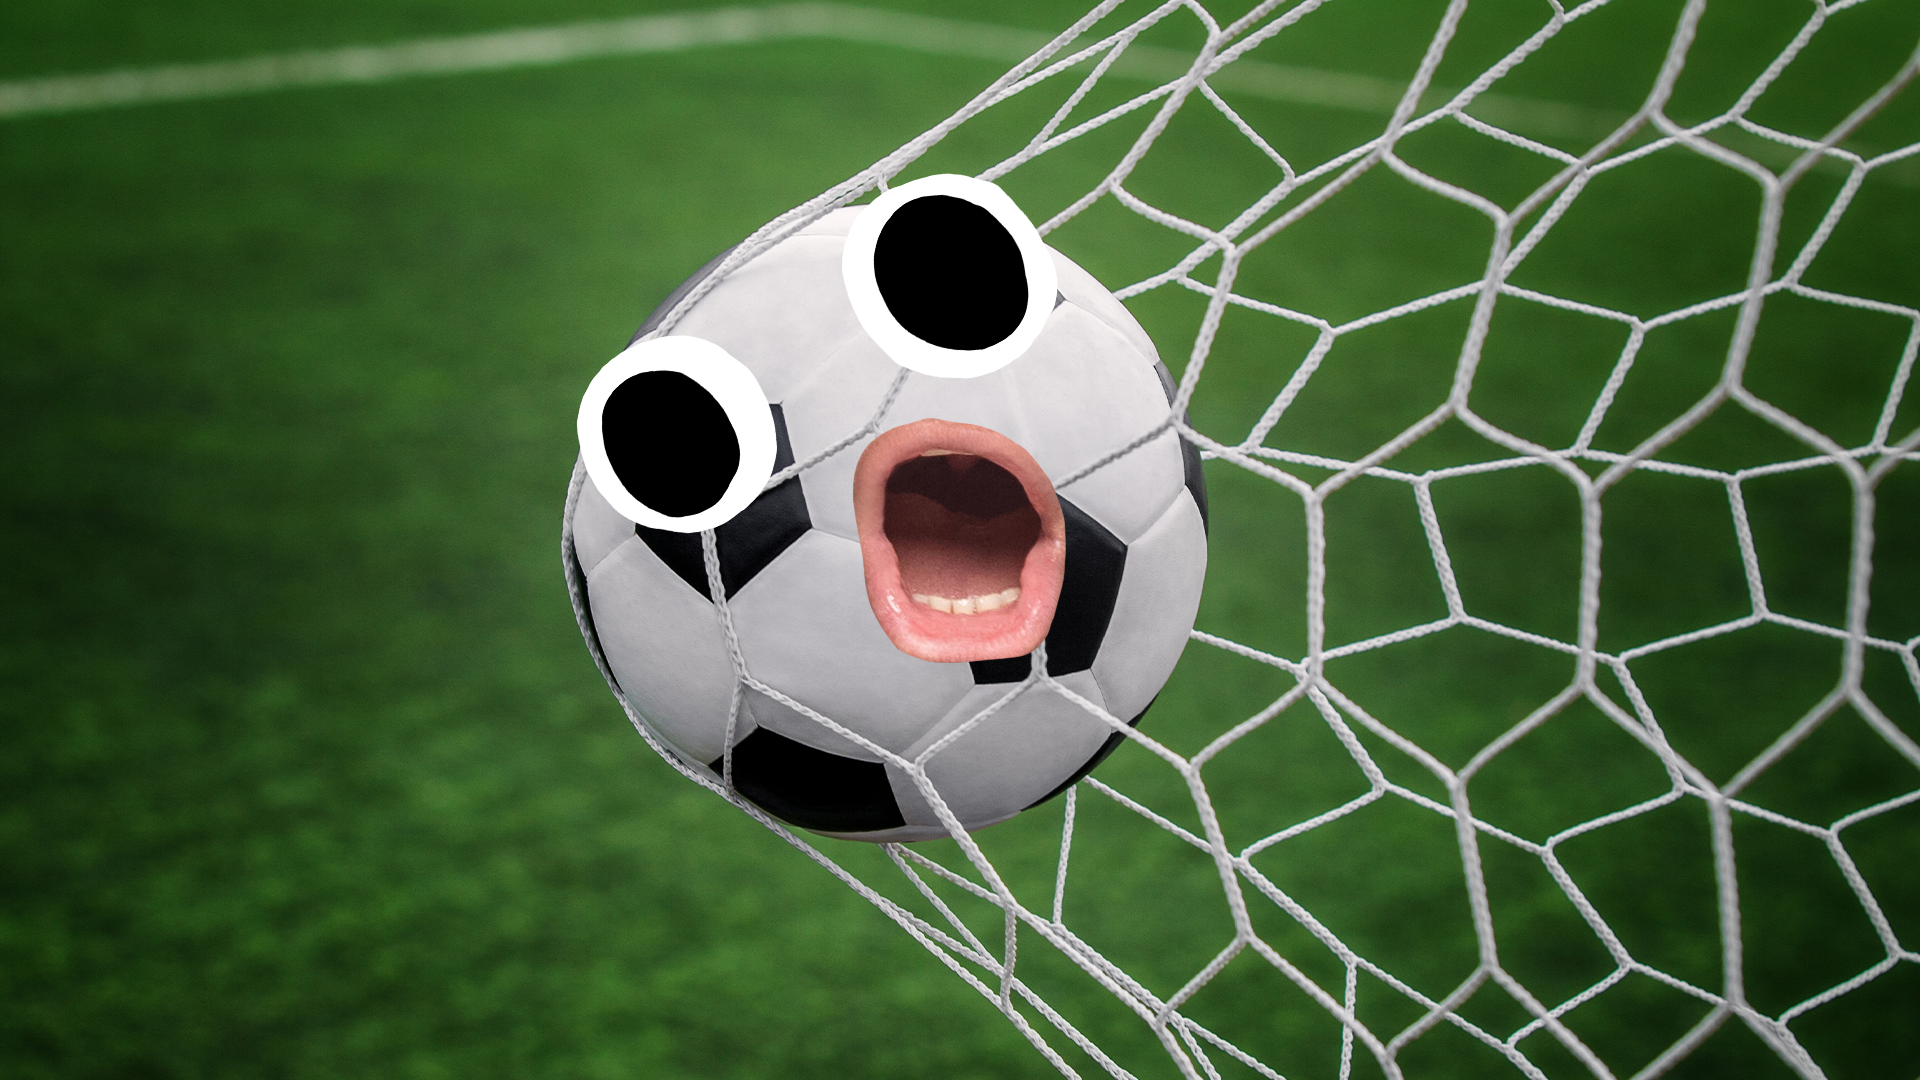 Football with face in goal net